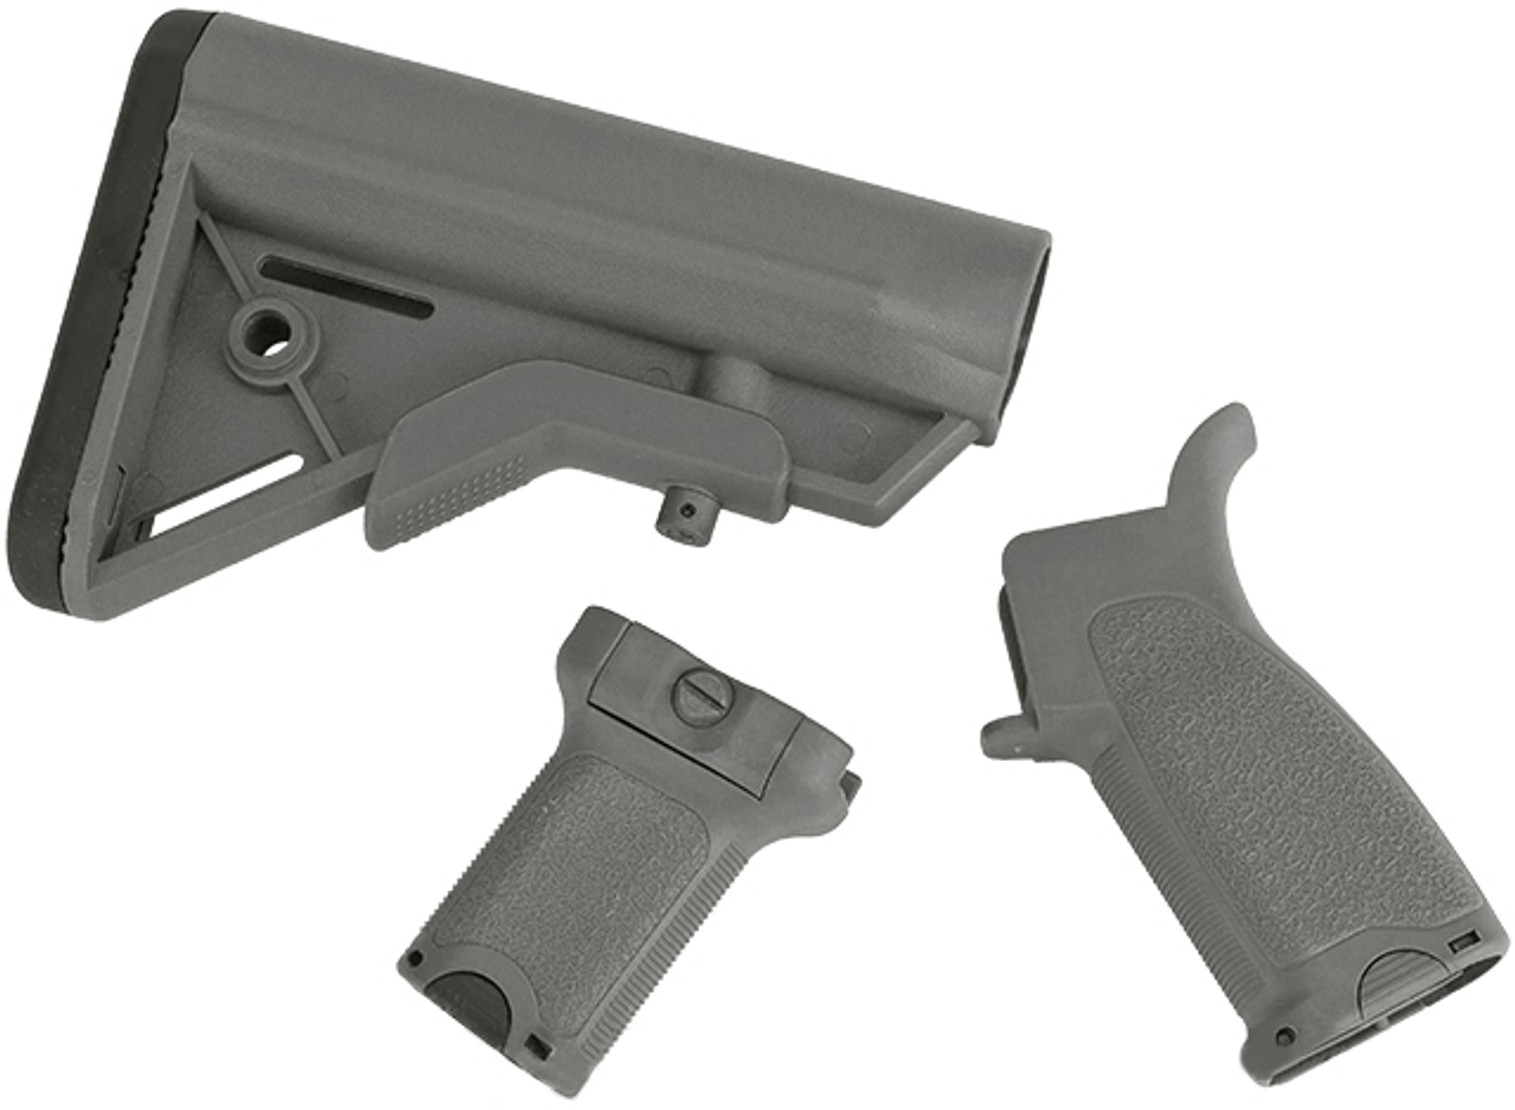 Dytac Furniture Kit for M4 and M16 Airsoft AEG Rifles - Midnight Grey